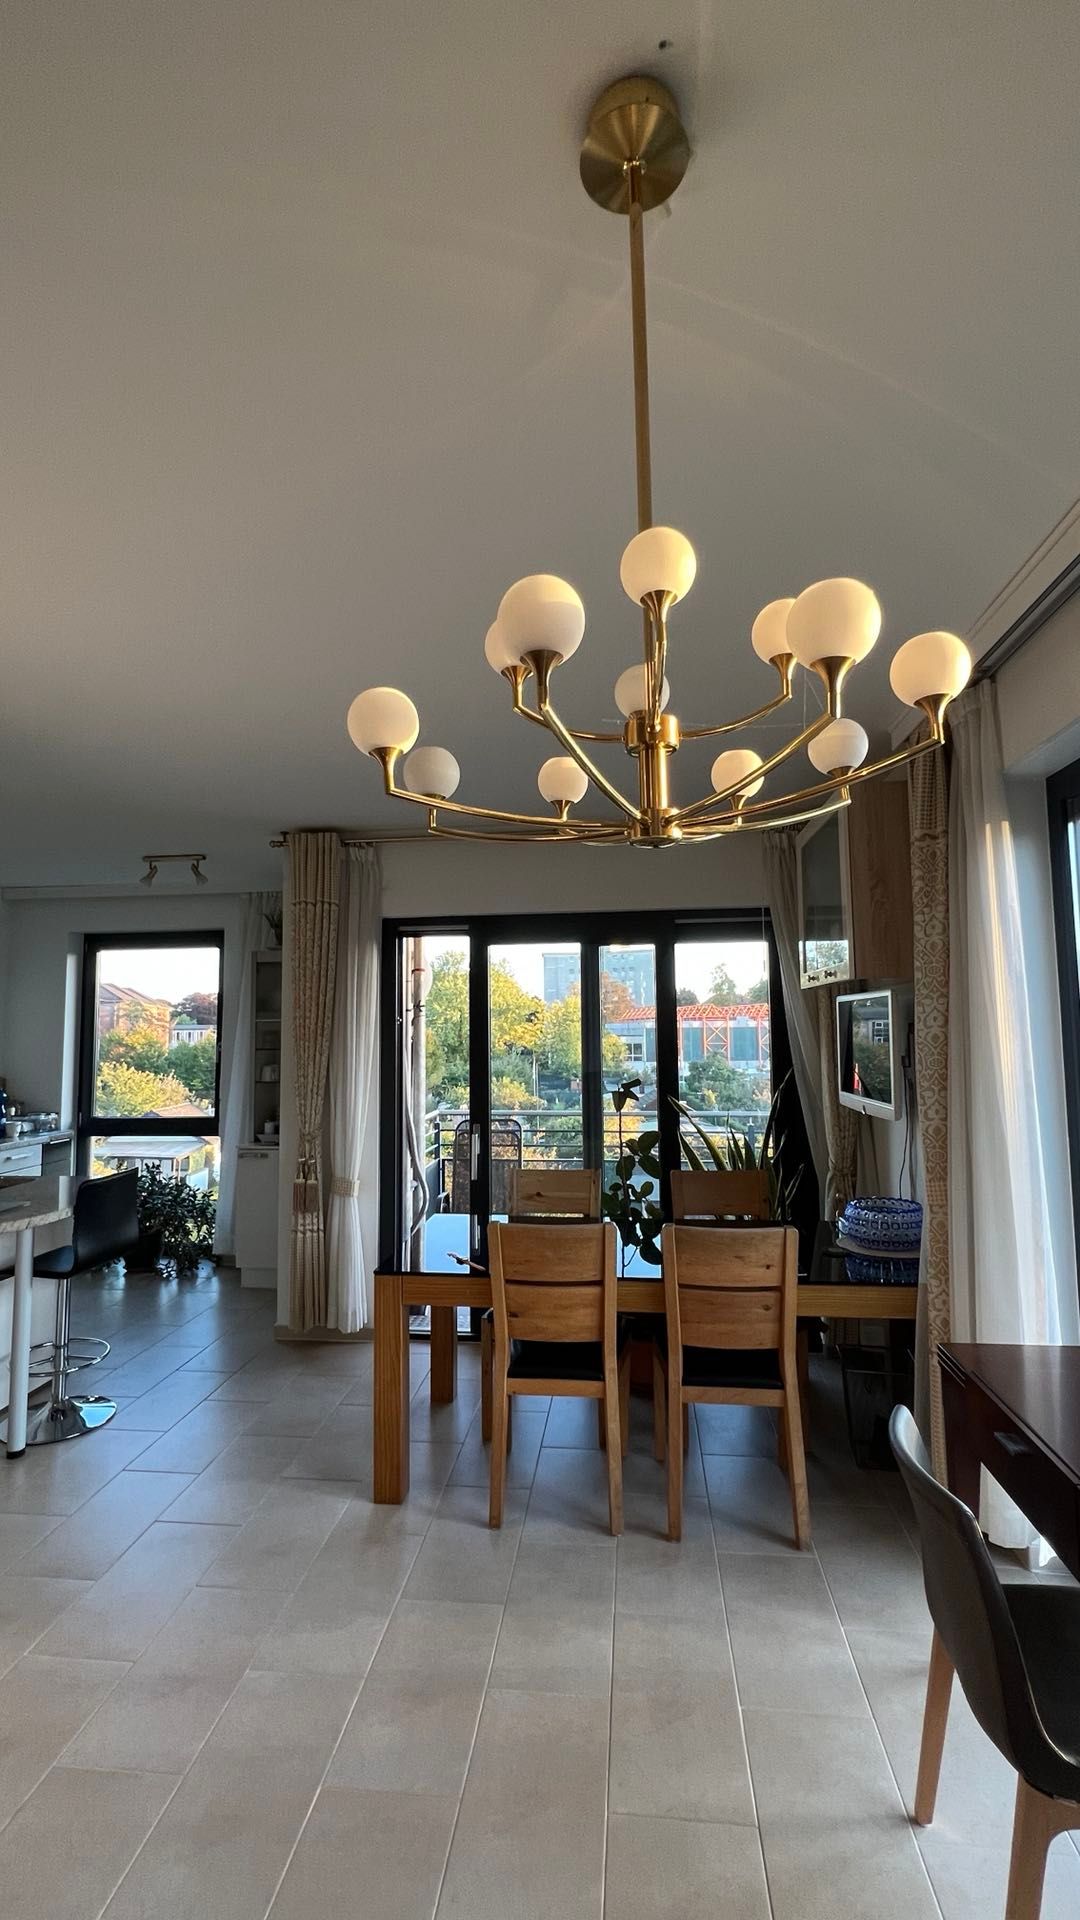 Rare opportunity: Modern apartment in one of Dusseldorf's most popular districts (REWE is nextdoor, 10min to city center, close to Wildpark)